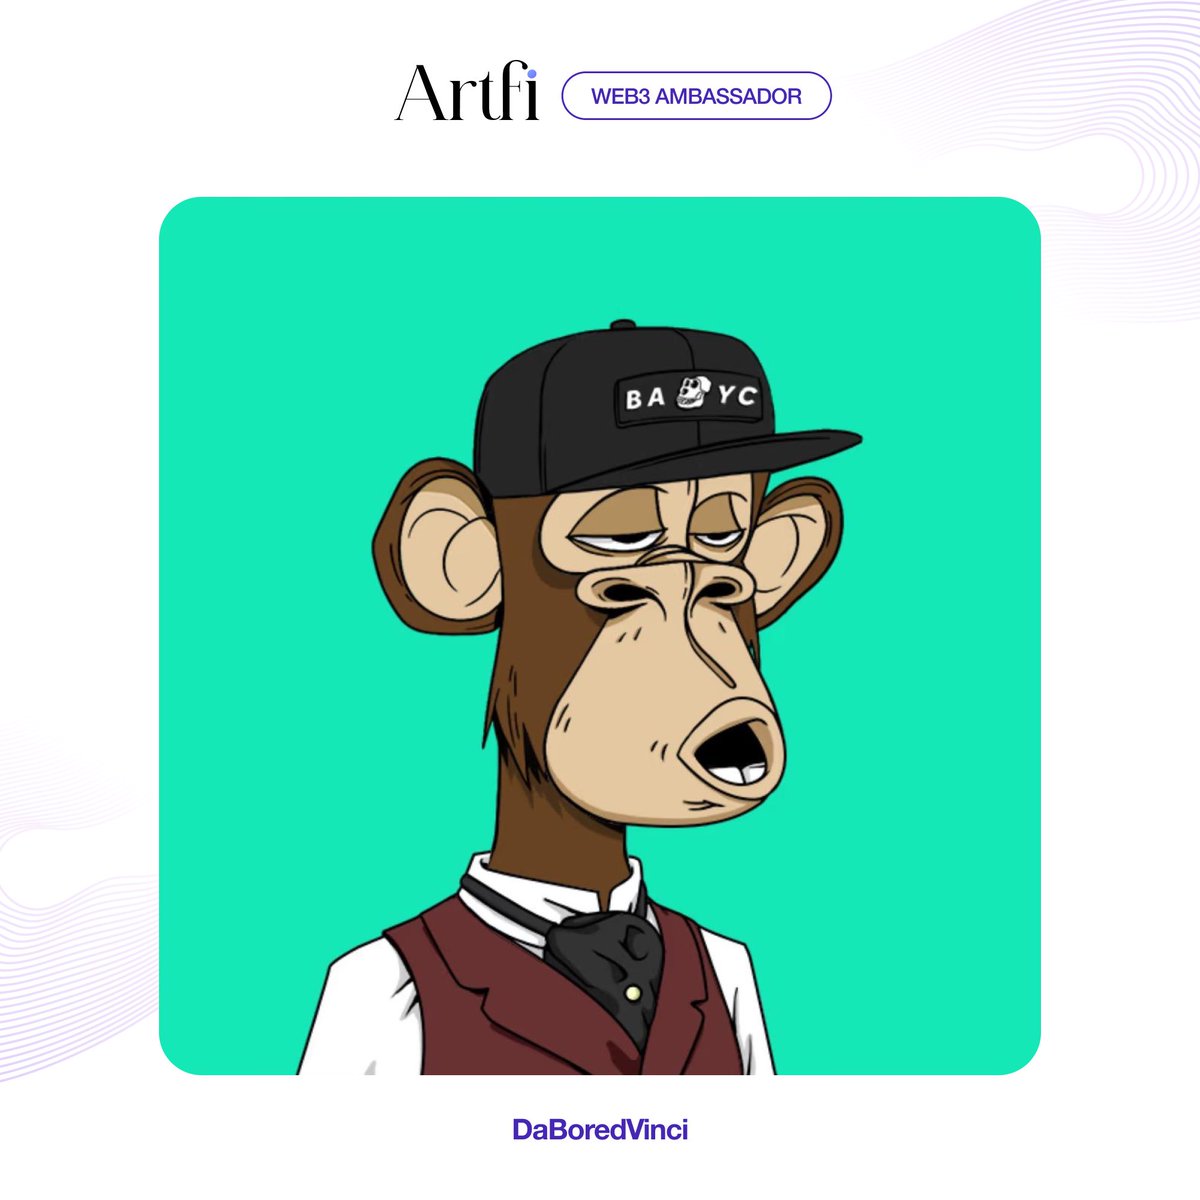 Hello Artfians, I'm happy to announce that we now have an official Web3 brand ambassador for Artfi! His name is DaBorerdVinci, and he is the only Ape enthusiastic about Real World Asset Tokenization. How cool is that? Please welcome him with love and warmth. Follow him and